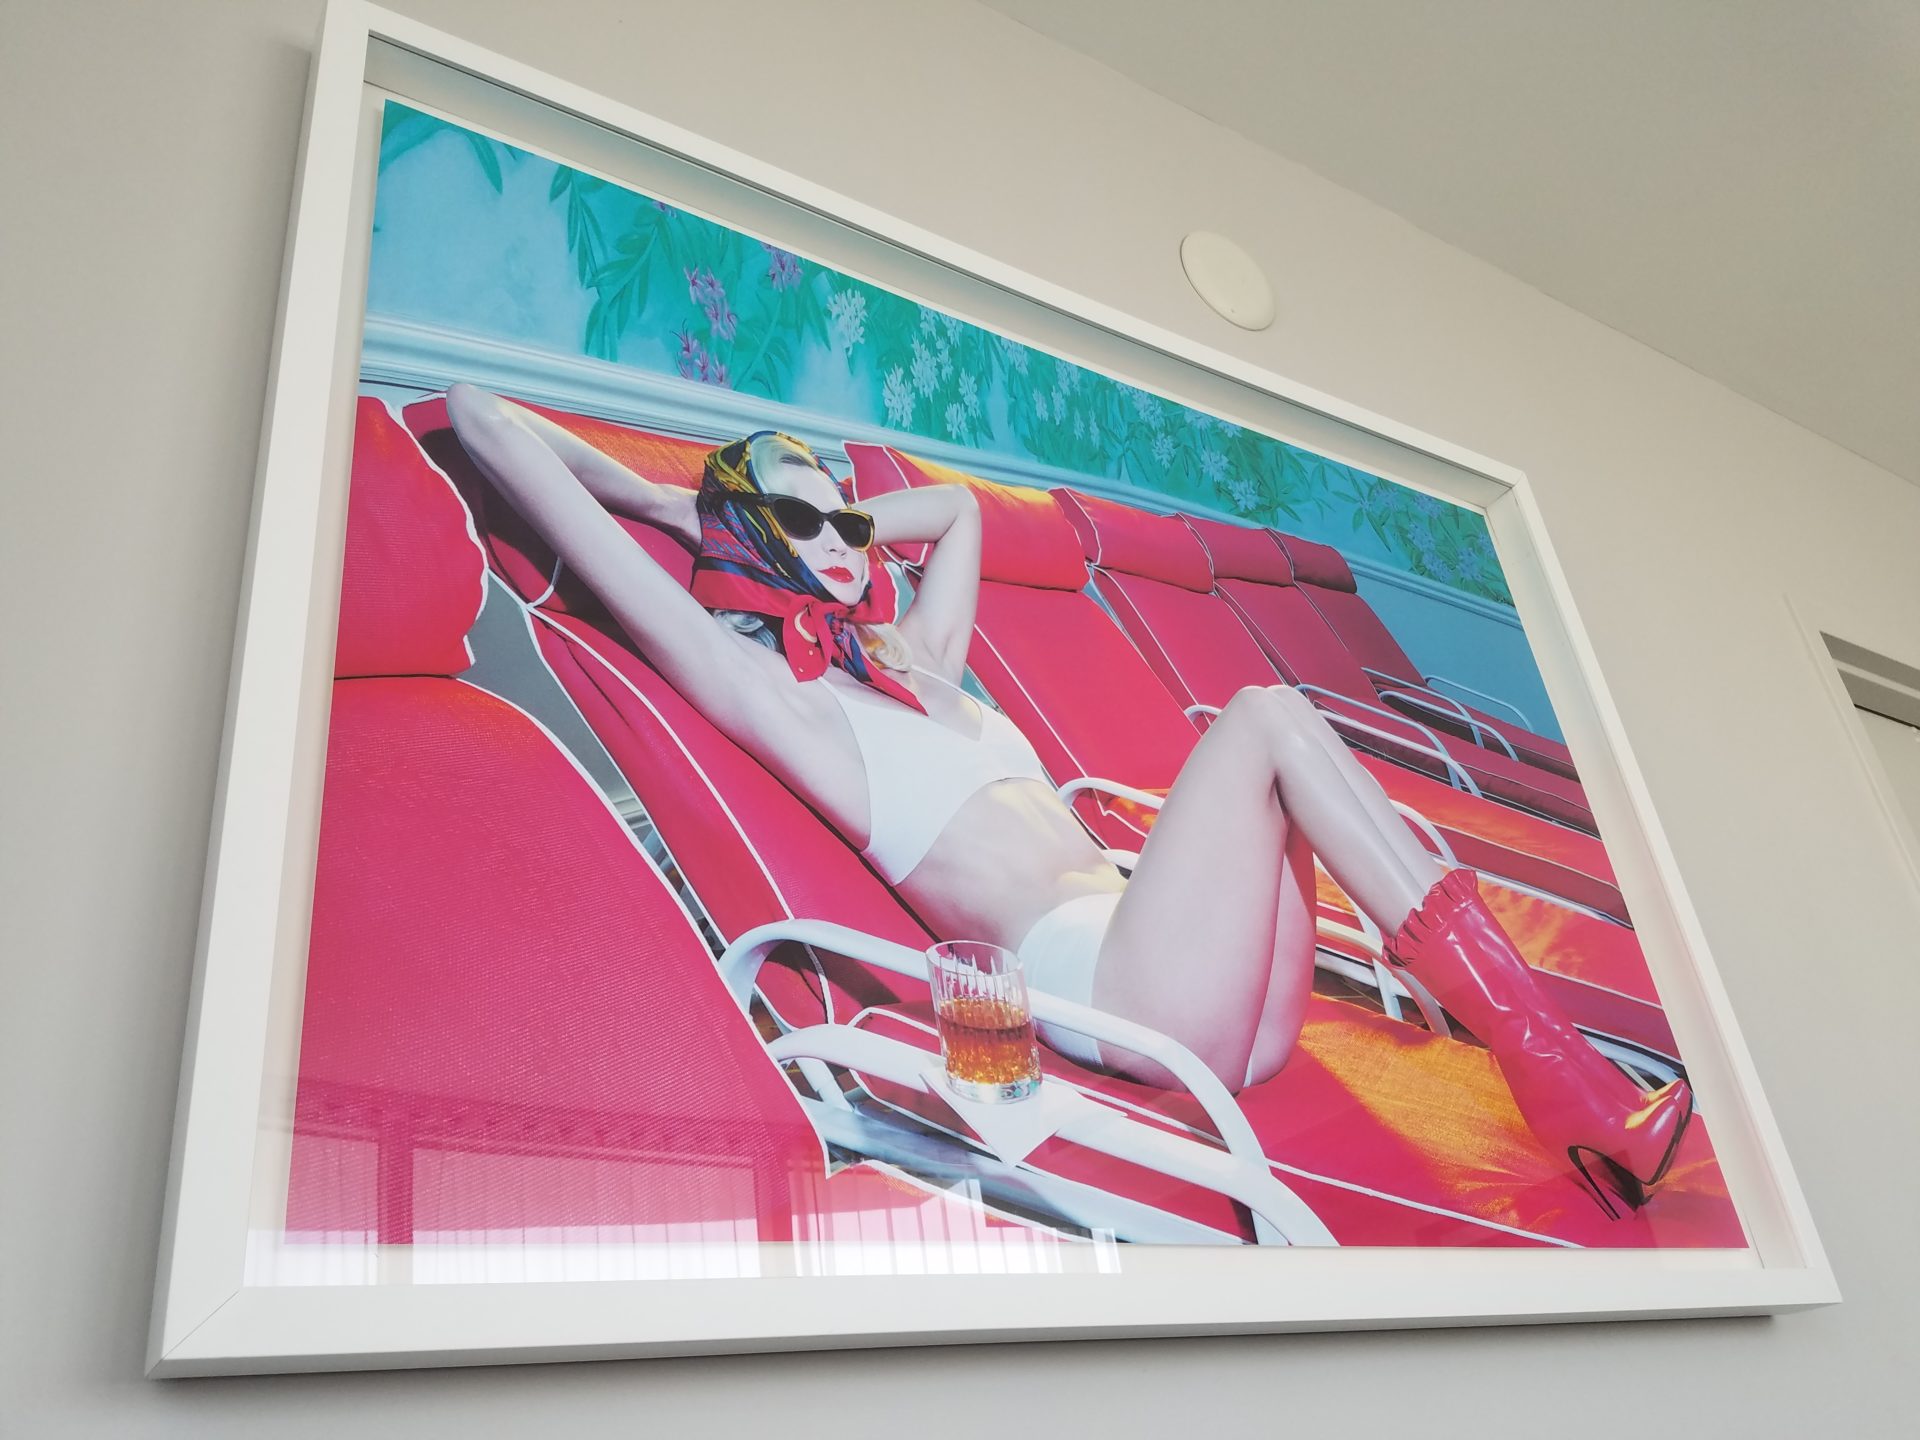 a framed picture of a woman in a garment on a red couch